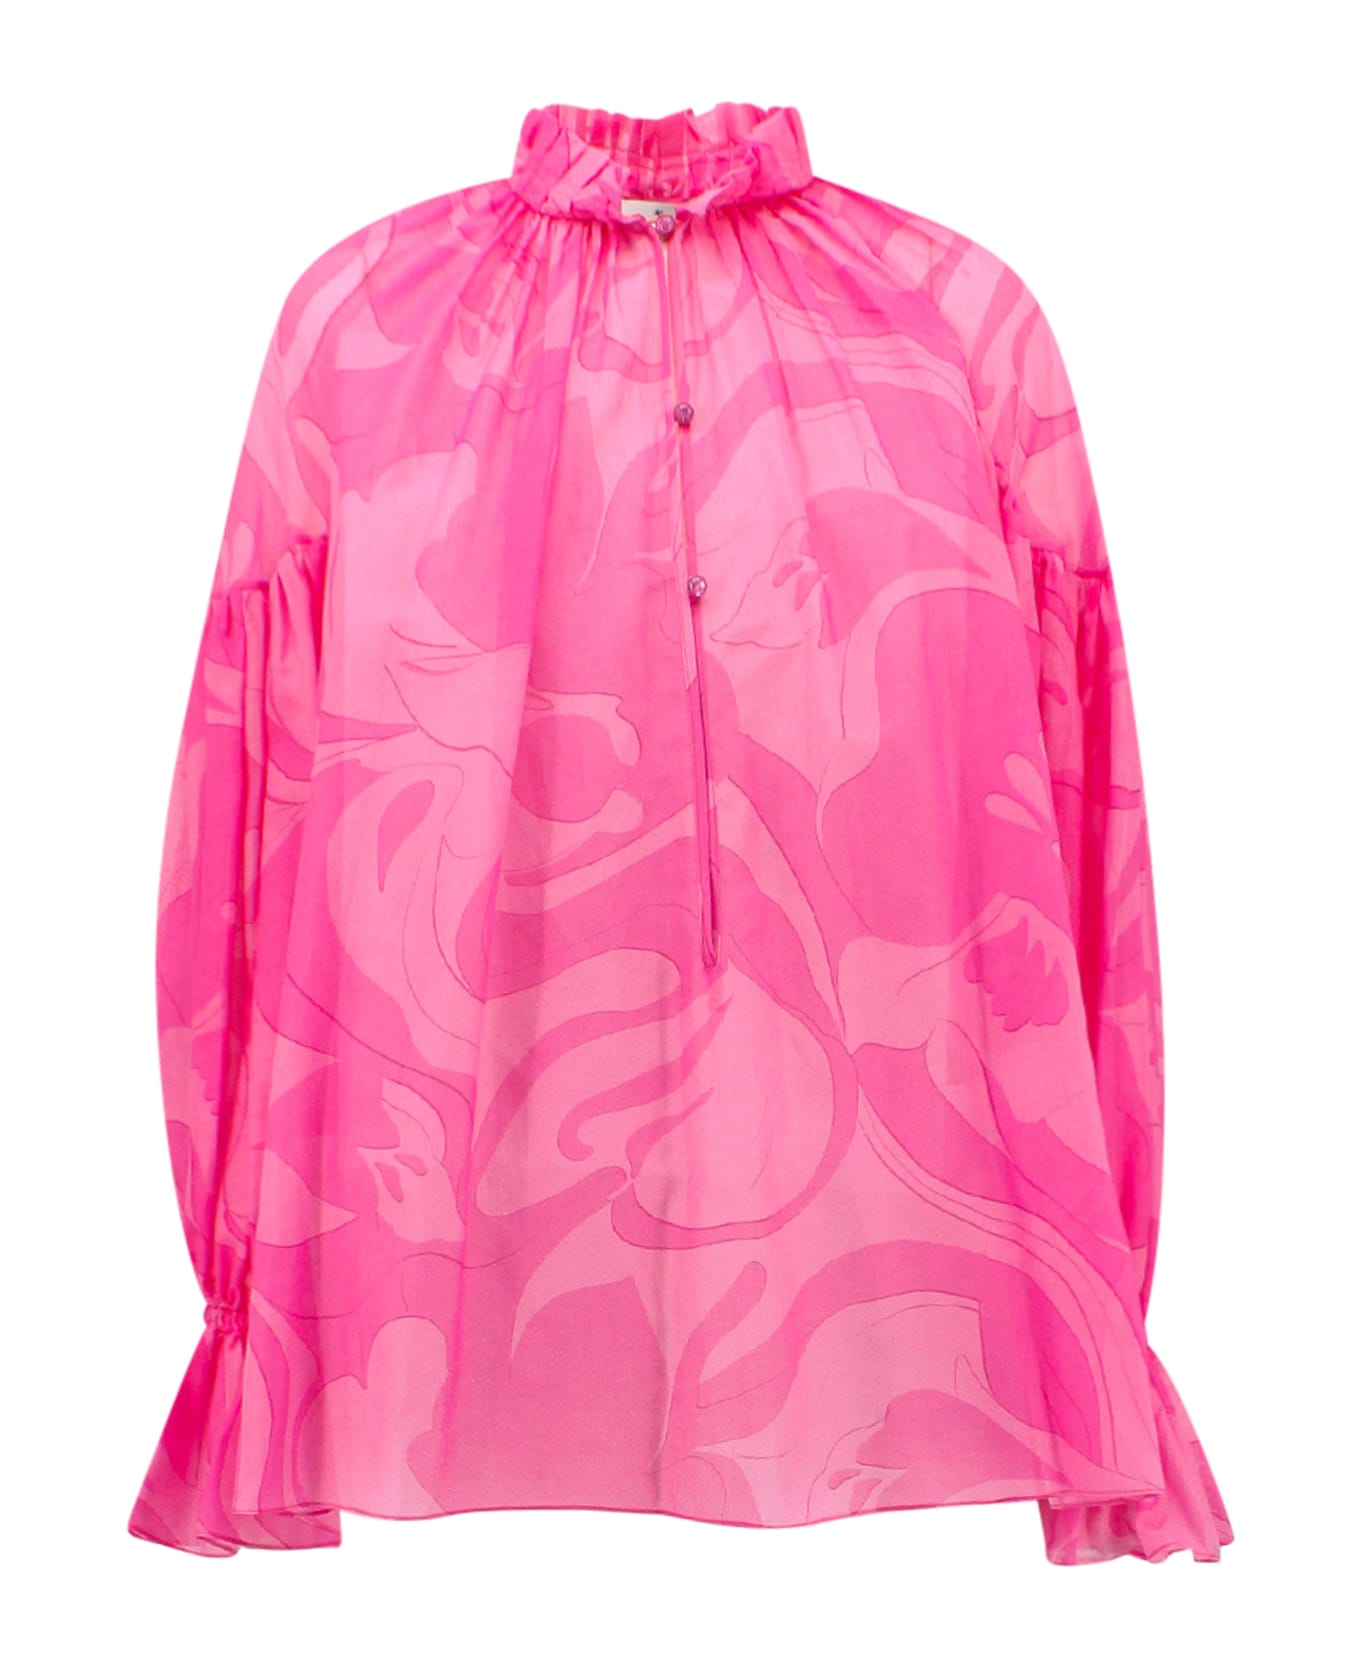 Etro Printed Voile Blouse - Pink